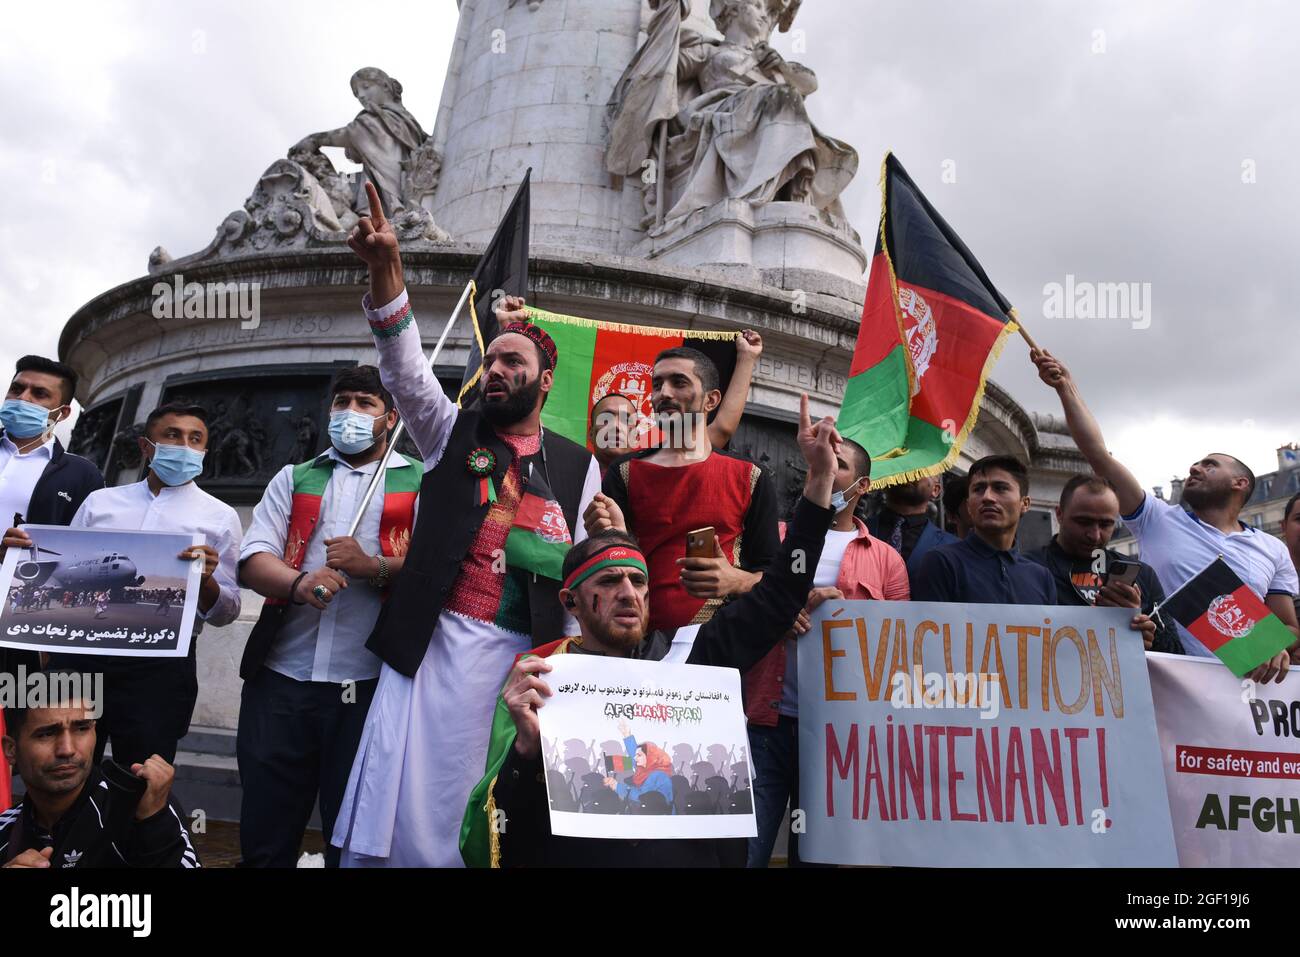 *** STRICTLY NO SALES TO FRENCH MEDIA OR PUBLISHERS - RIGHTS RESERVED ***August 22, 2021 - Paris, France: Hundreds of Afghan and French people gather in Place de la Republique to protest against the Taliban takeover of Afghanistan and demand a safe evacuation for Afghan people and their family from Kabul airport. Stock Photo